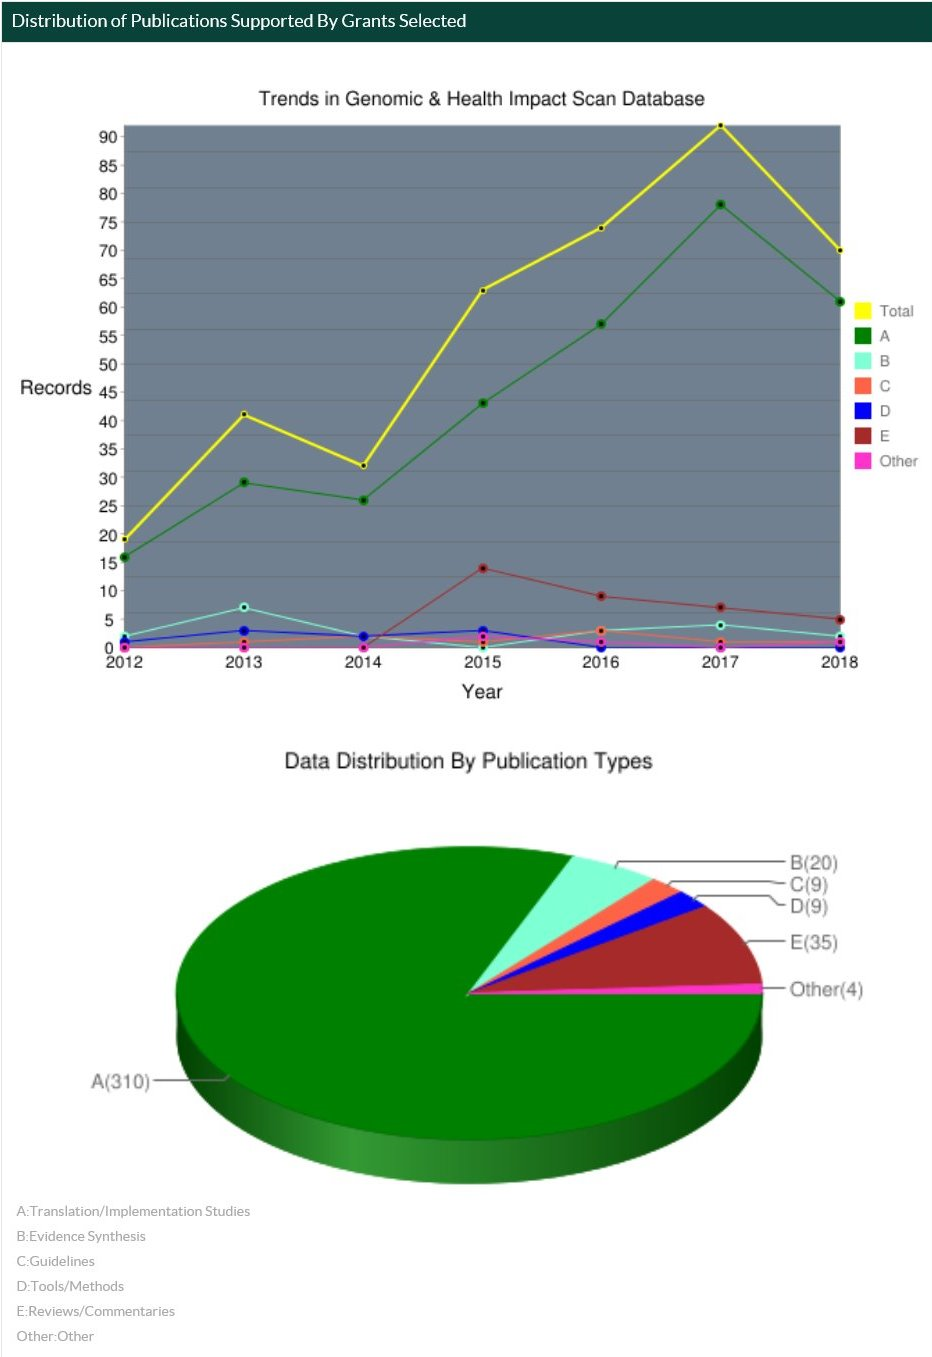 Trends in Genomics & Health Impact Database from 2012 through 2018 by category type and the data distribution by publication types in a pie chart